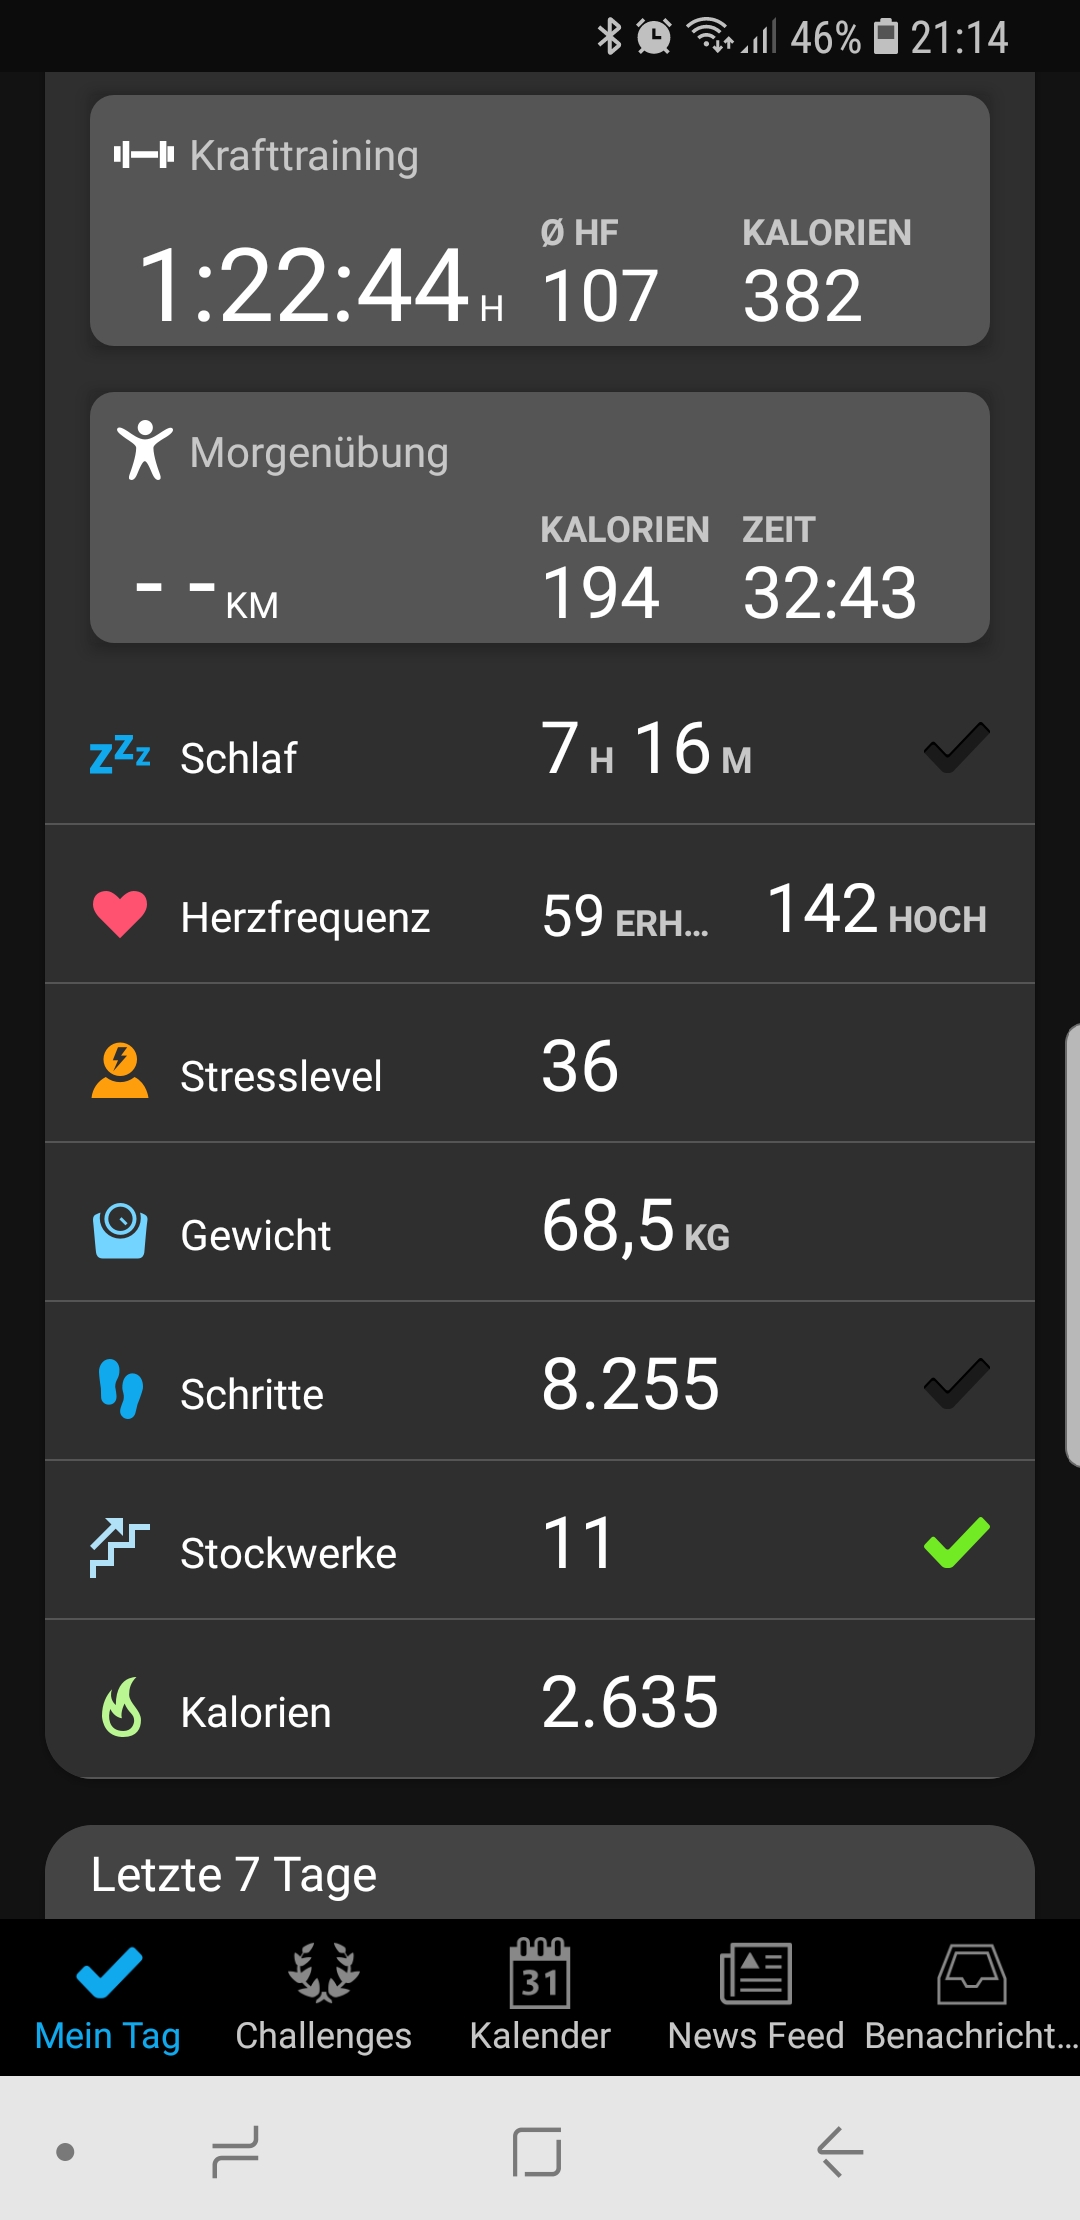 Farben in 'Mein Tag' - Garmin Connect Mobile iOS - Mobile Apps & Web - Forums